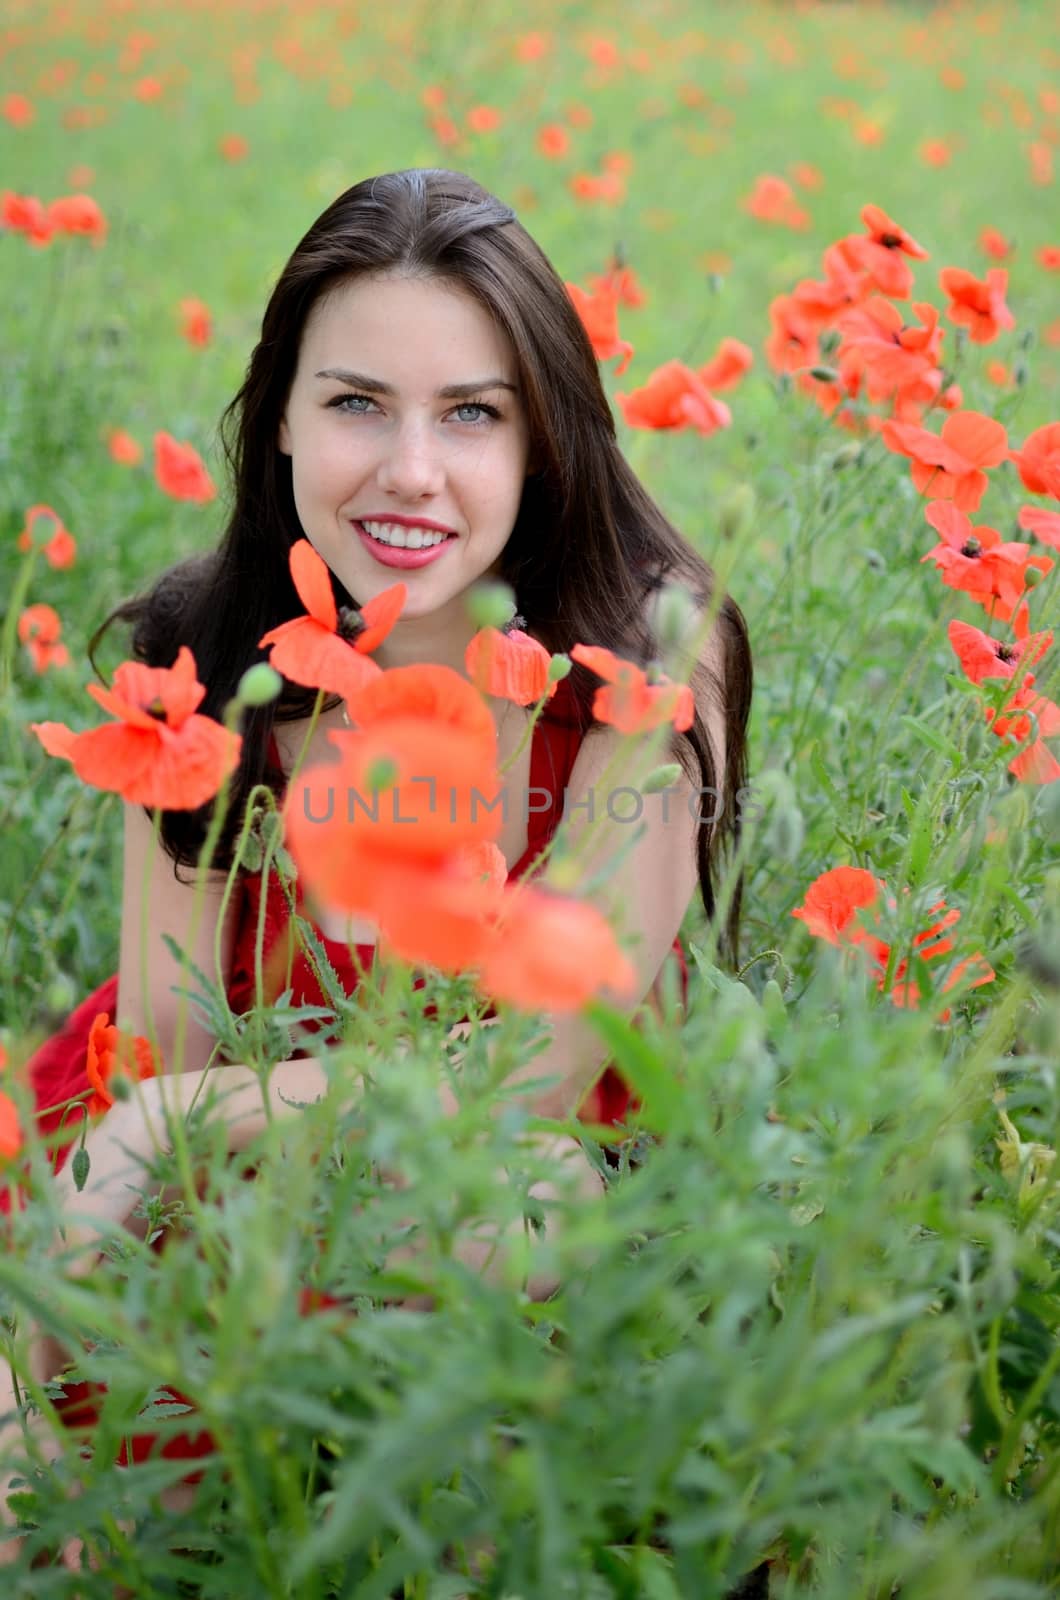 Smiling girl with poppies by bartekchiny